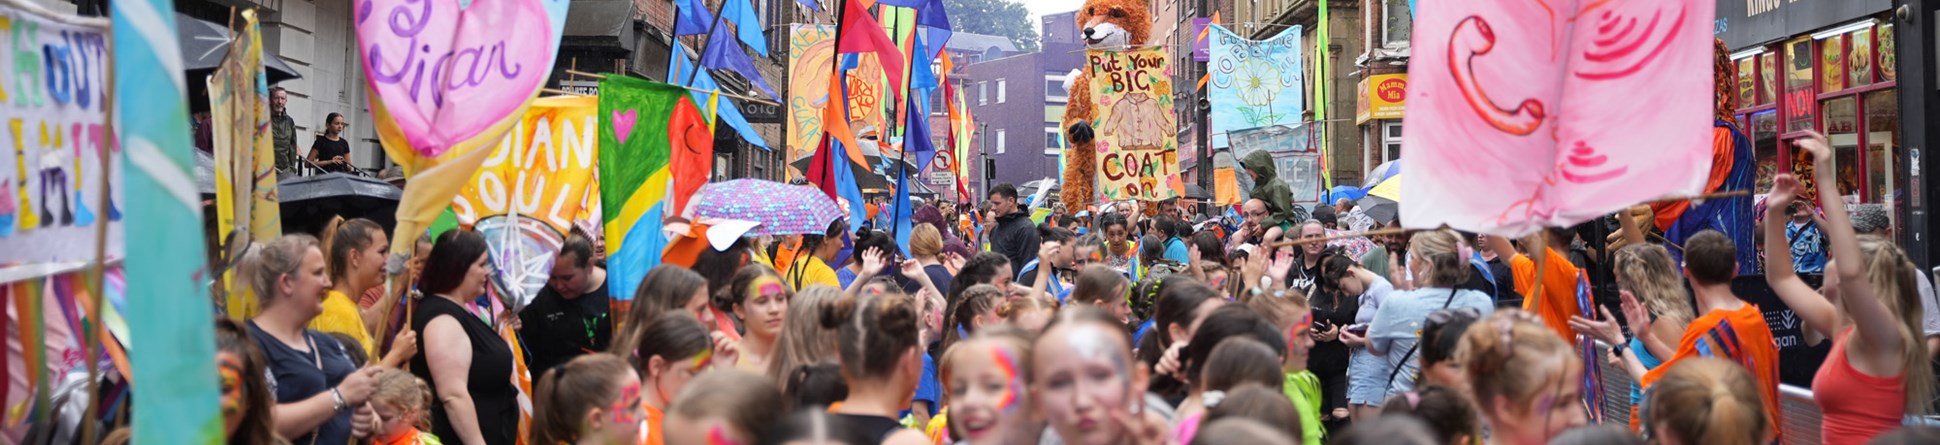 A tightly packed crowd of people with colourful banners and face paint. In the background a large fox puppet towers above the crowd.